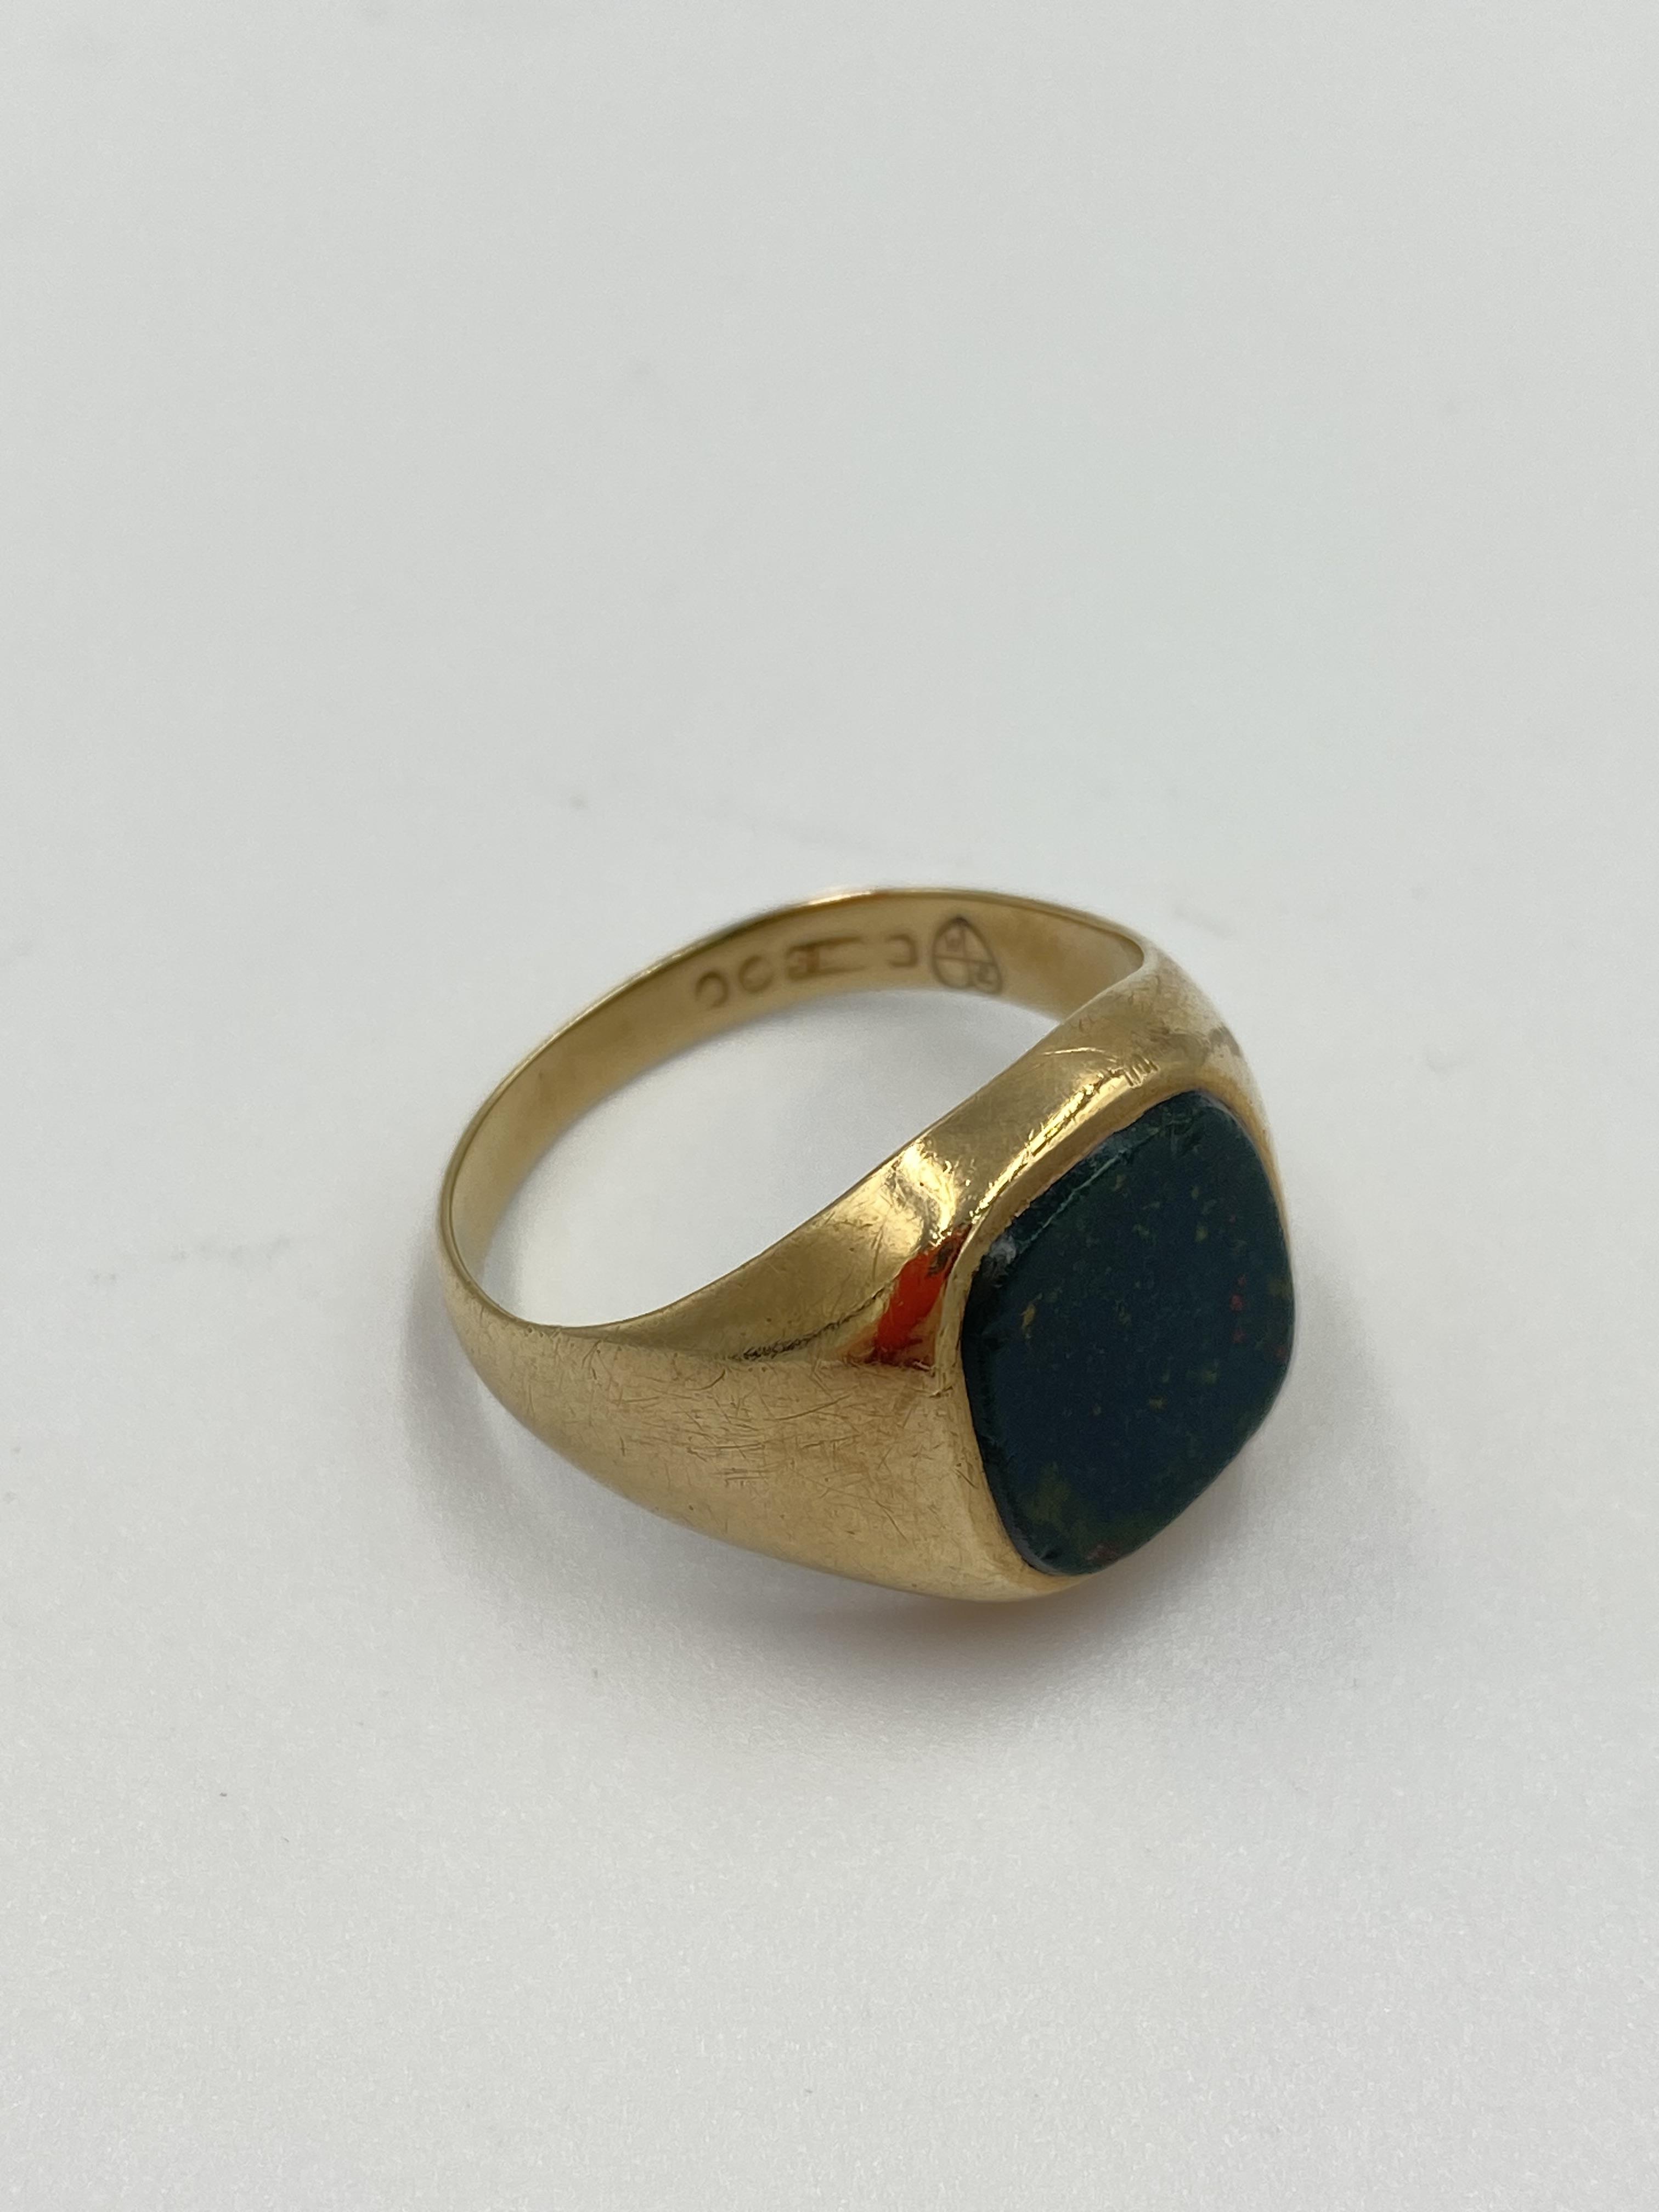 9ct gold and agate ring - Image 5 of 5